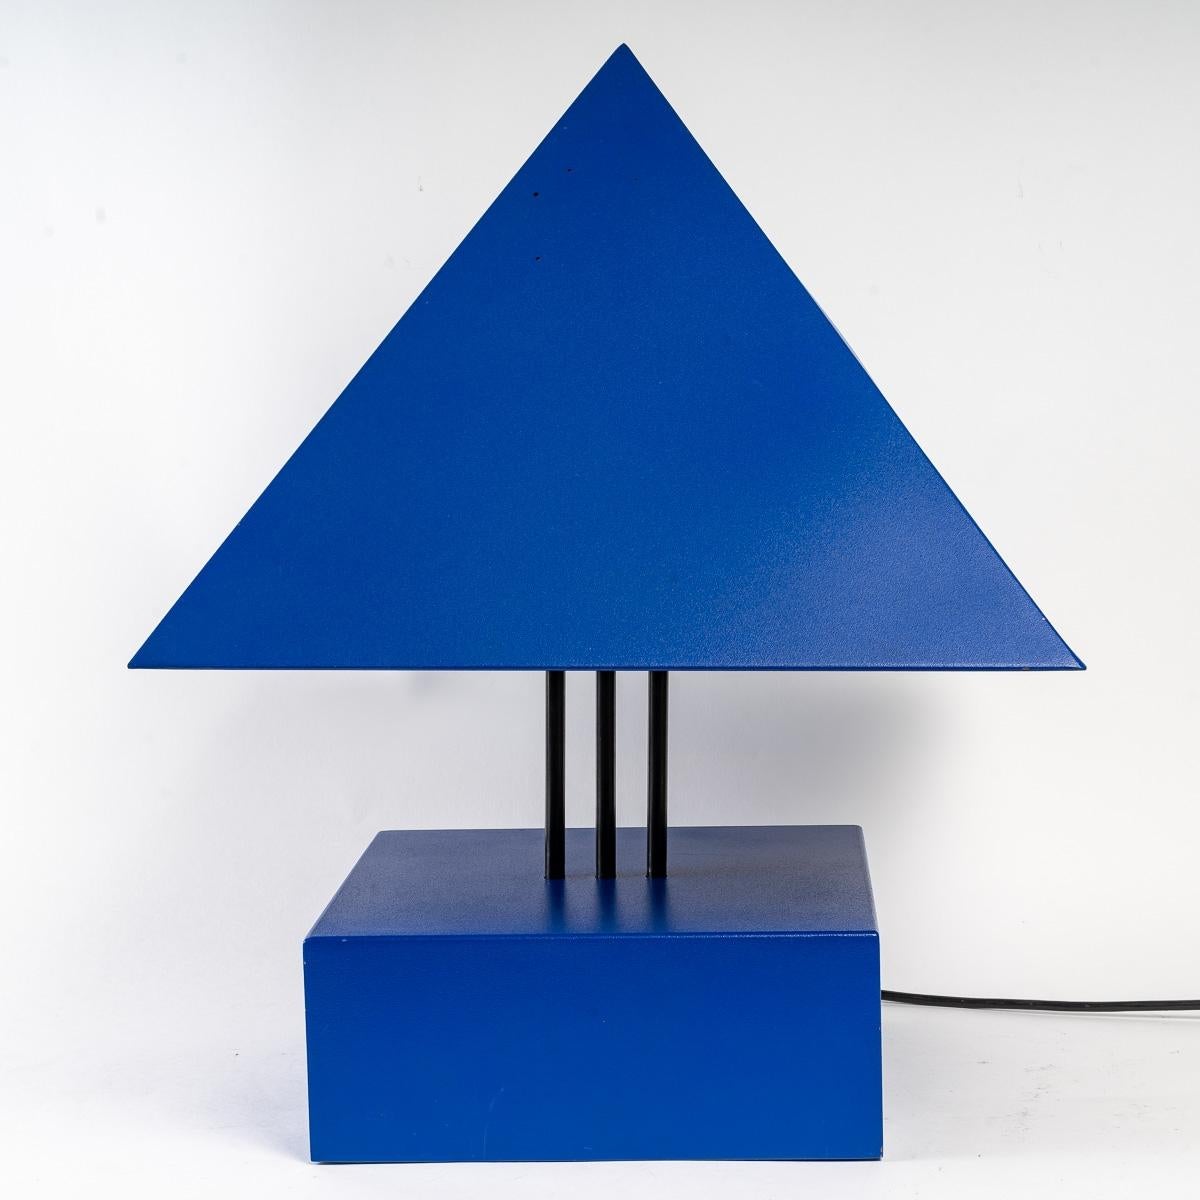 Blue painted metal triangle lamp by Alain Letessier, 1987.
Triangle lamp in blue painted metal with its remote control that raises and lowers the metal shade, 2 levels of light, 20th century, designer Alain Letessier (1952)
Measures: H: 52cm, W: